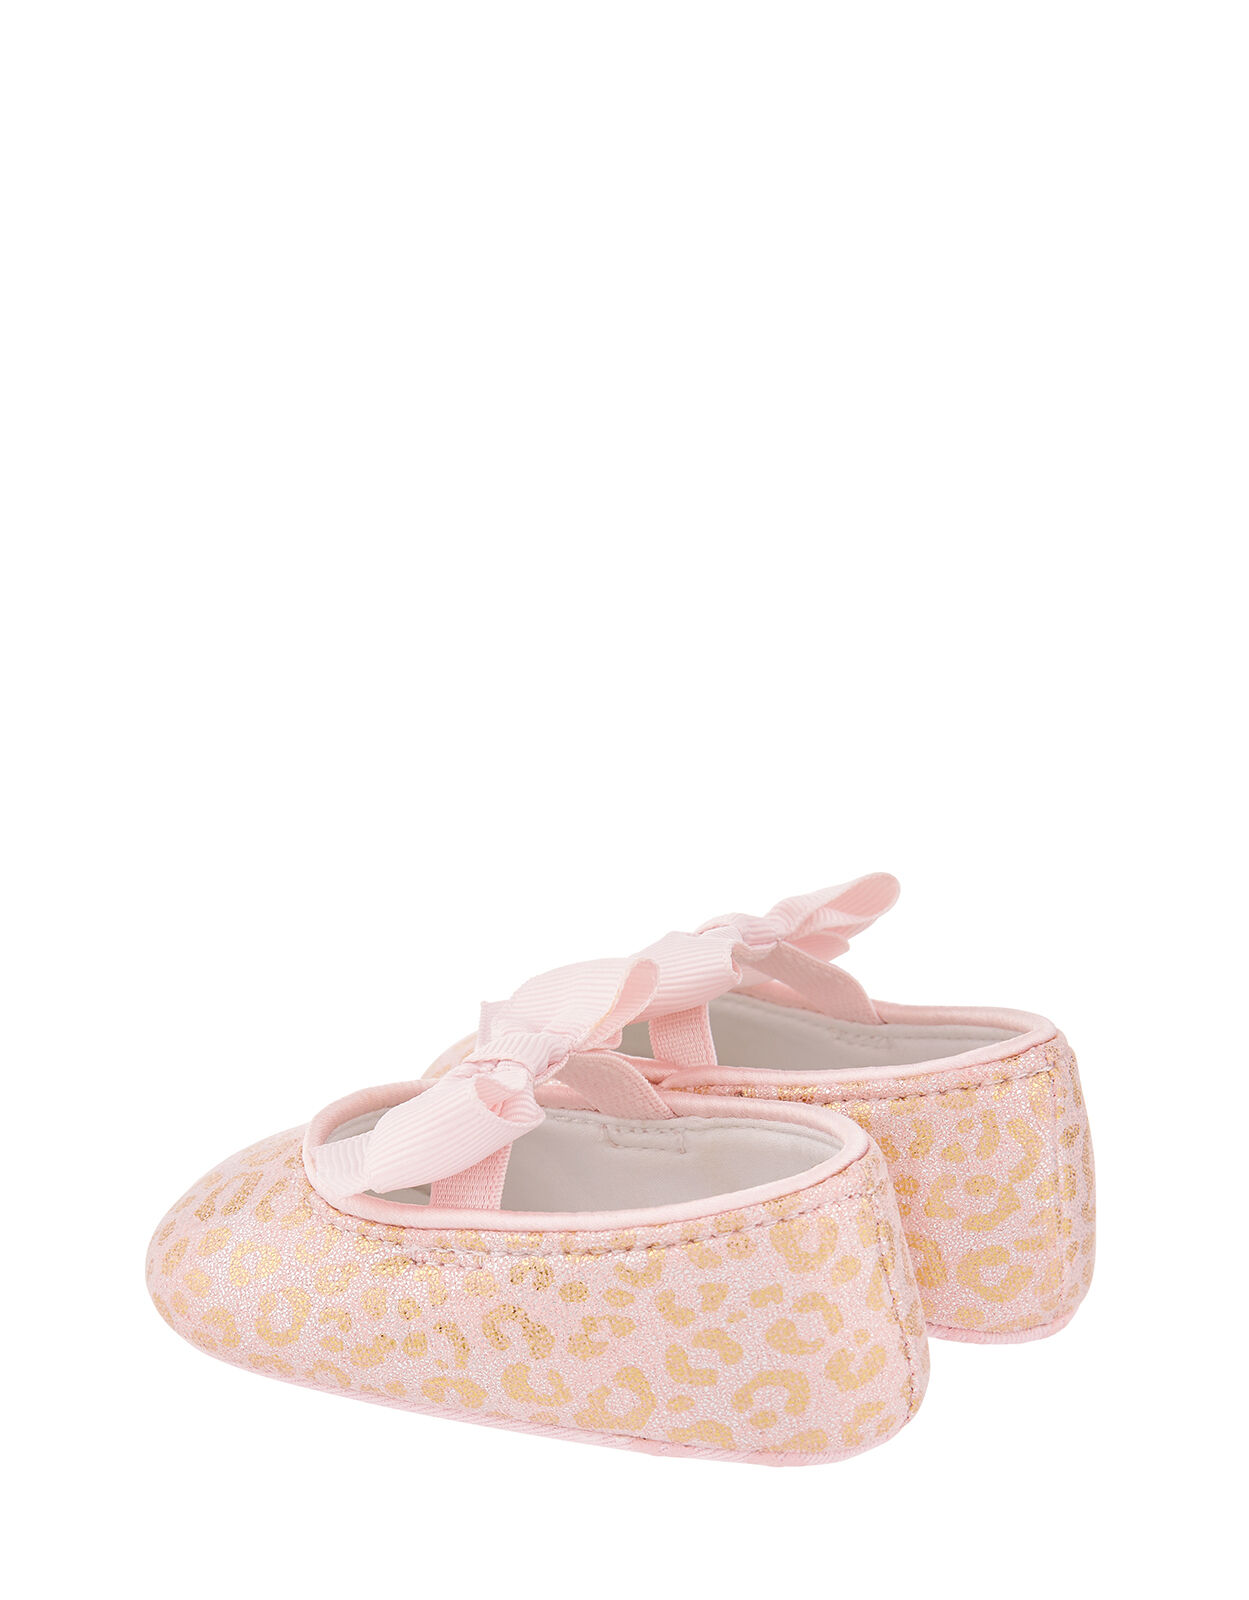 pale pink shoes